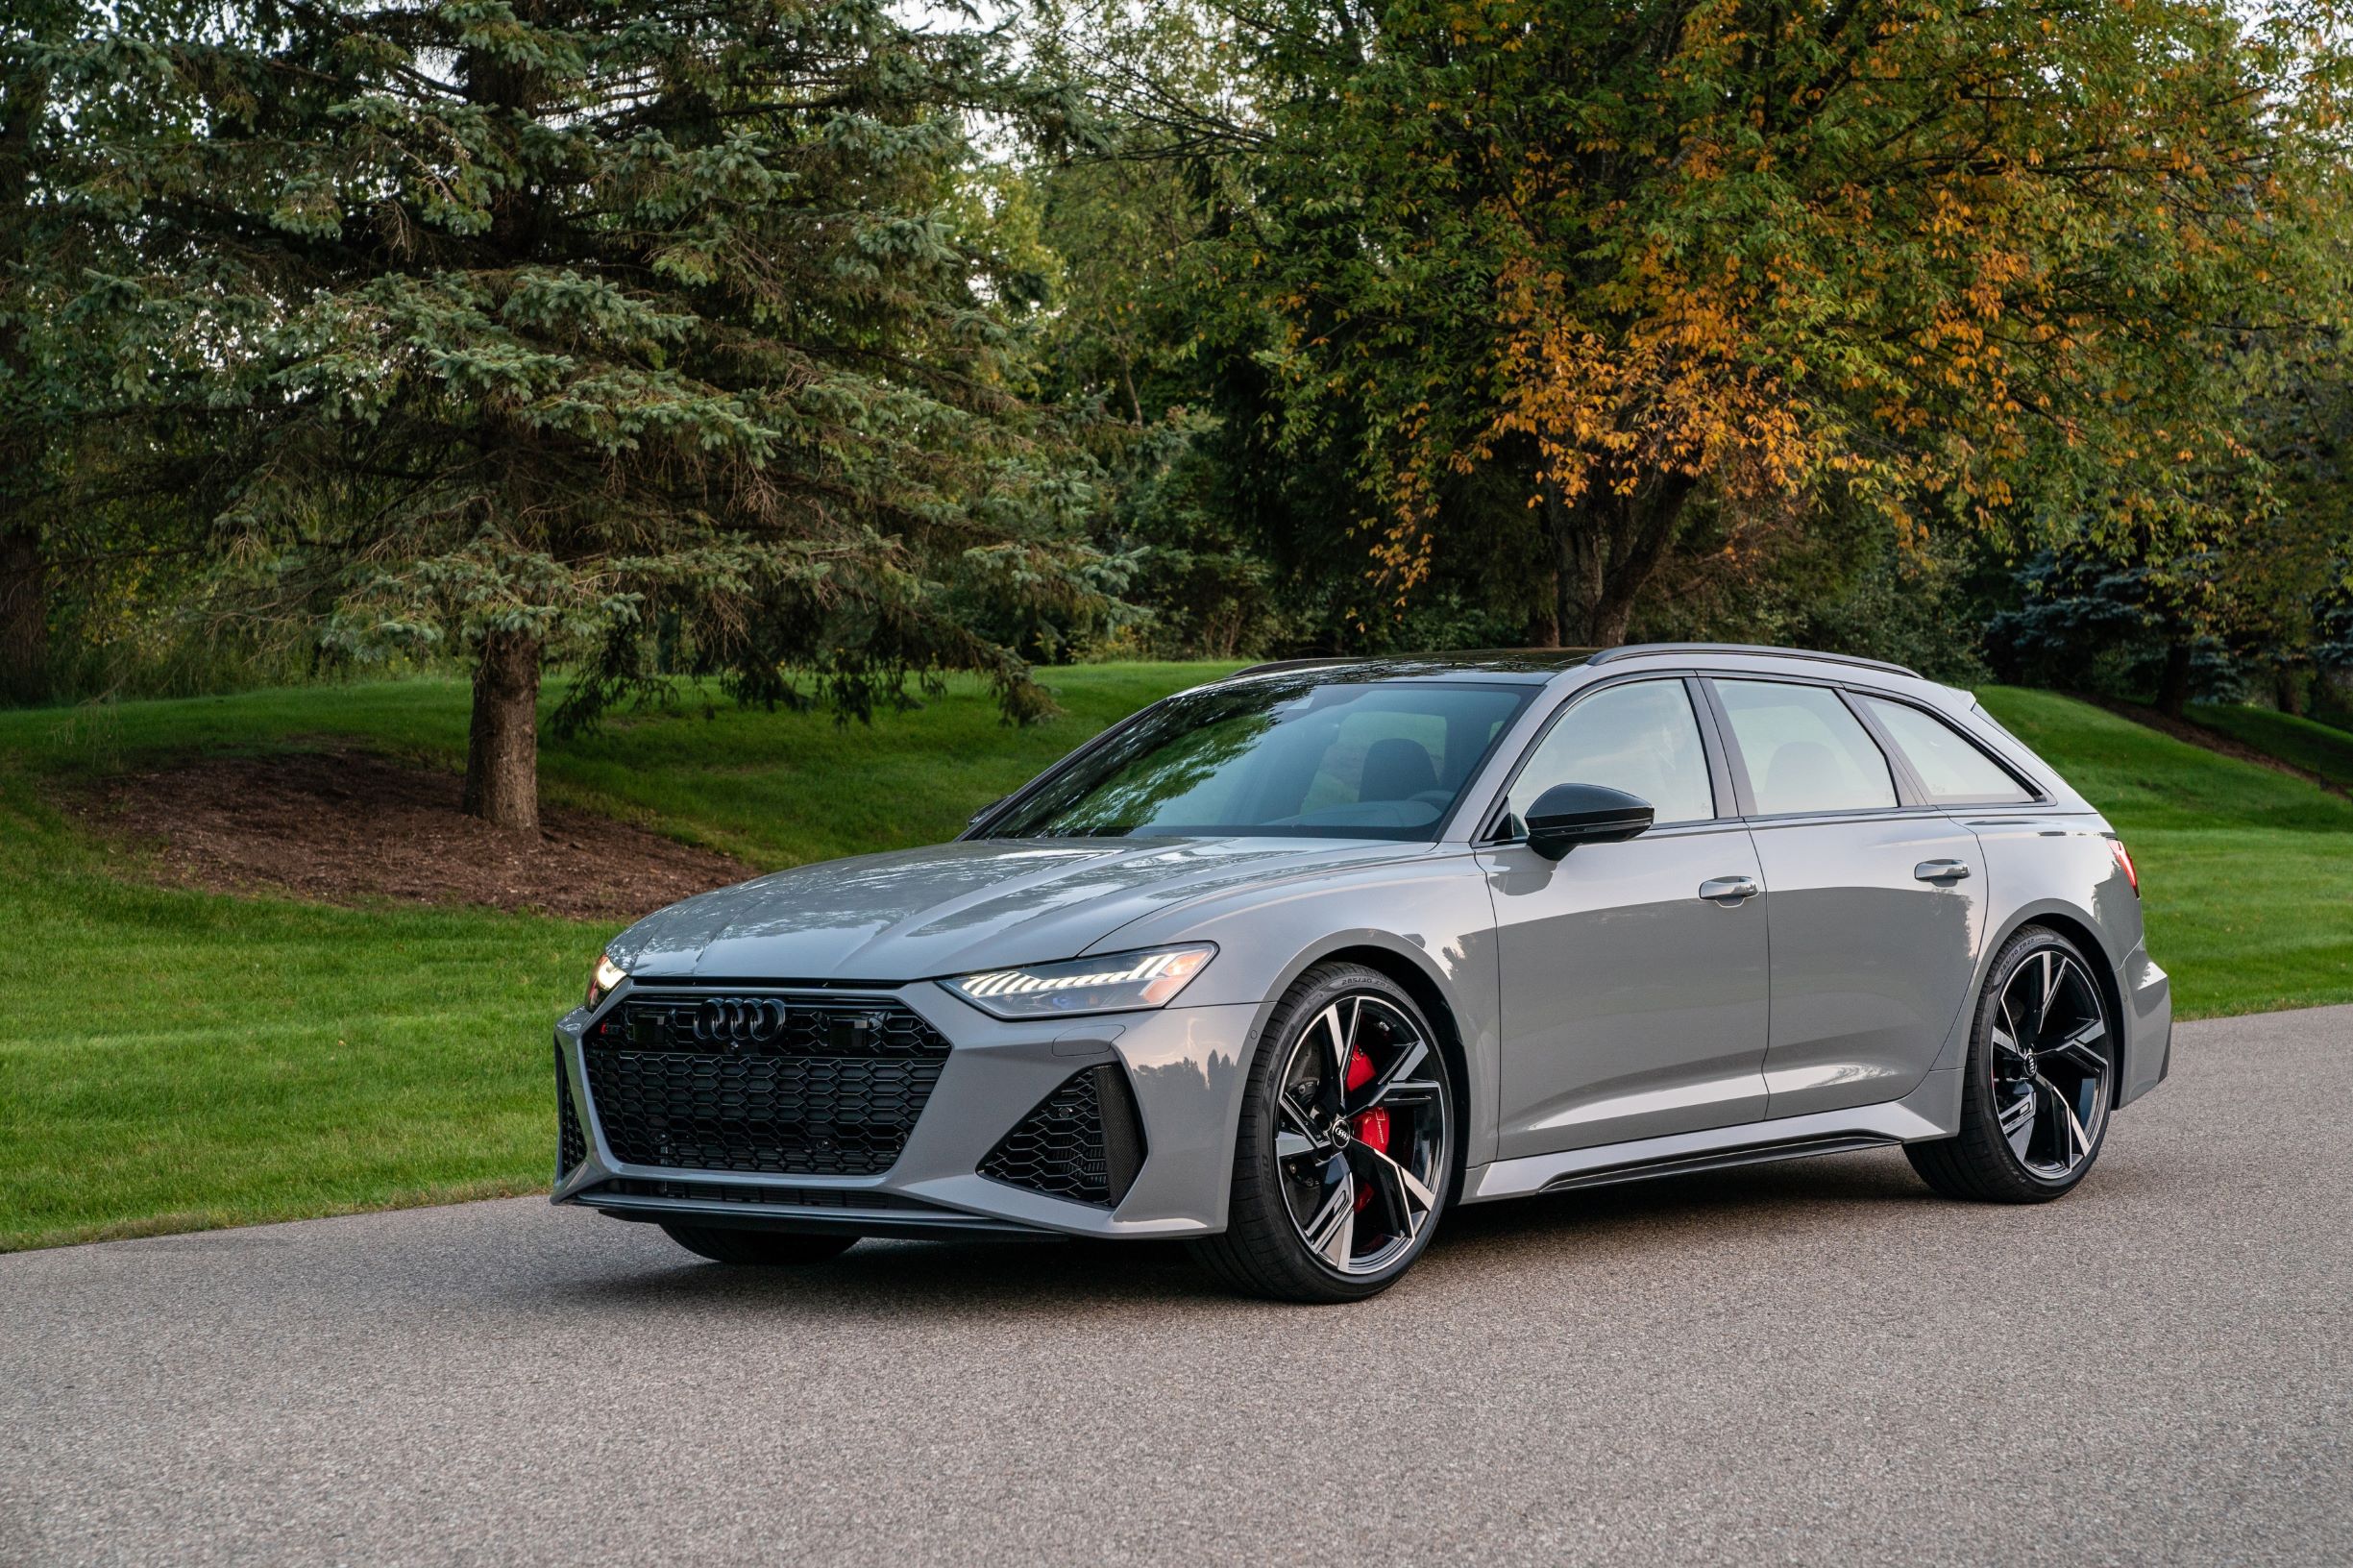 2021 Audi RS6 Avant: First Drive Review - Maxim